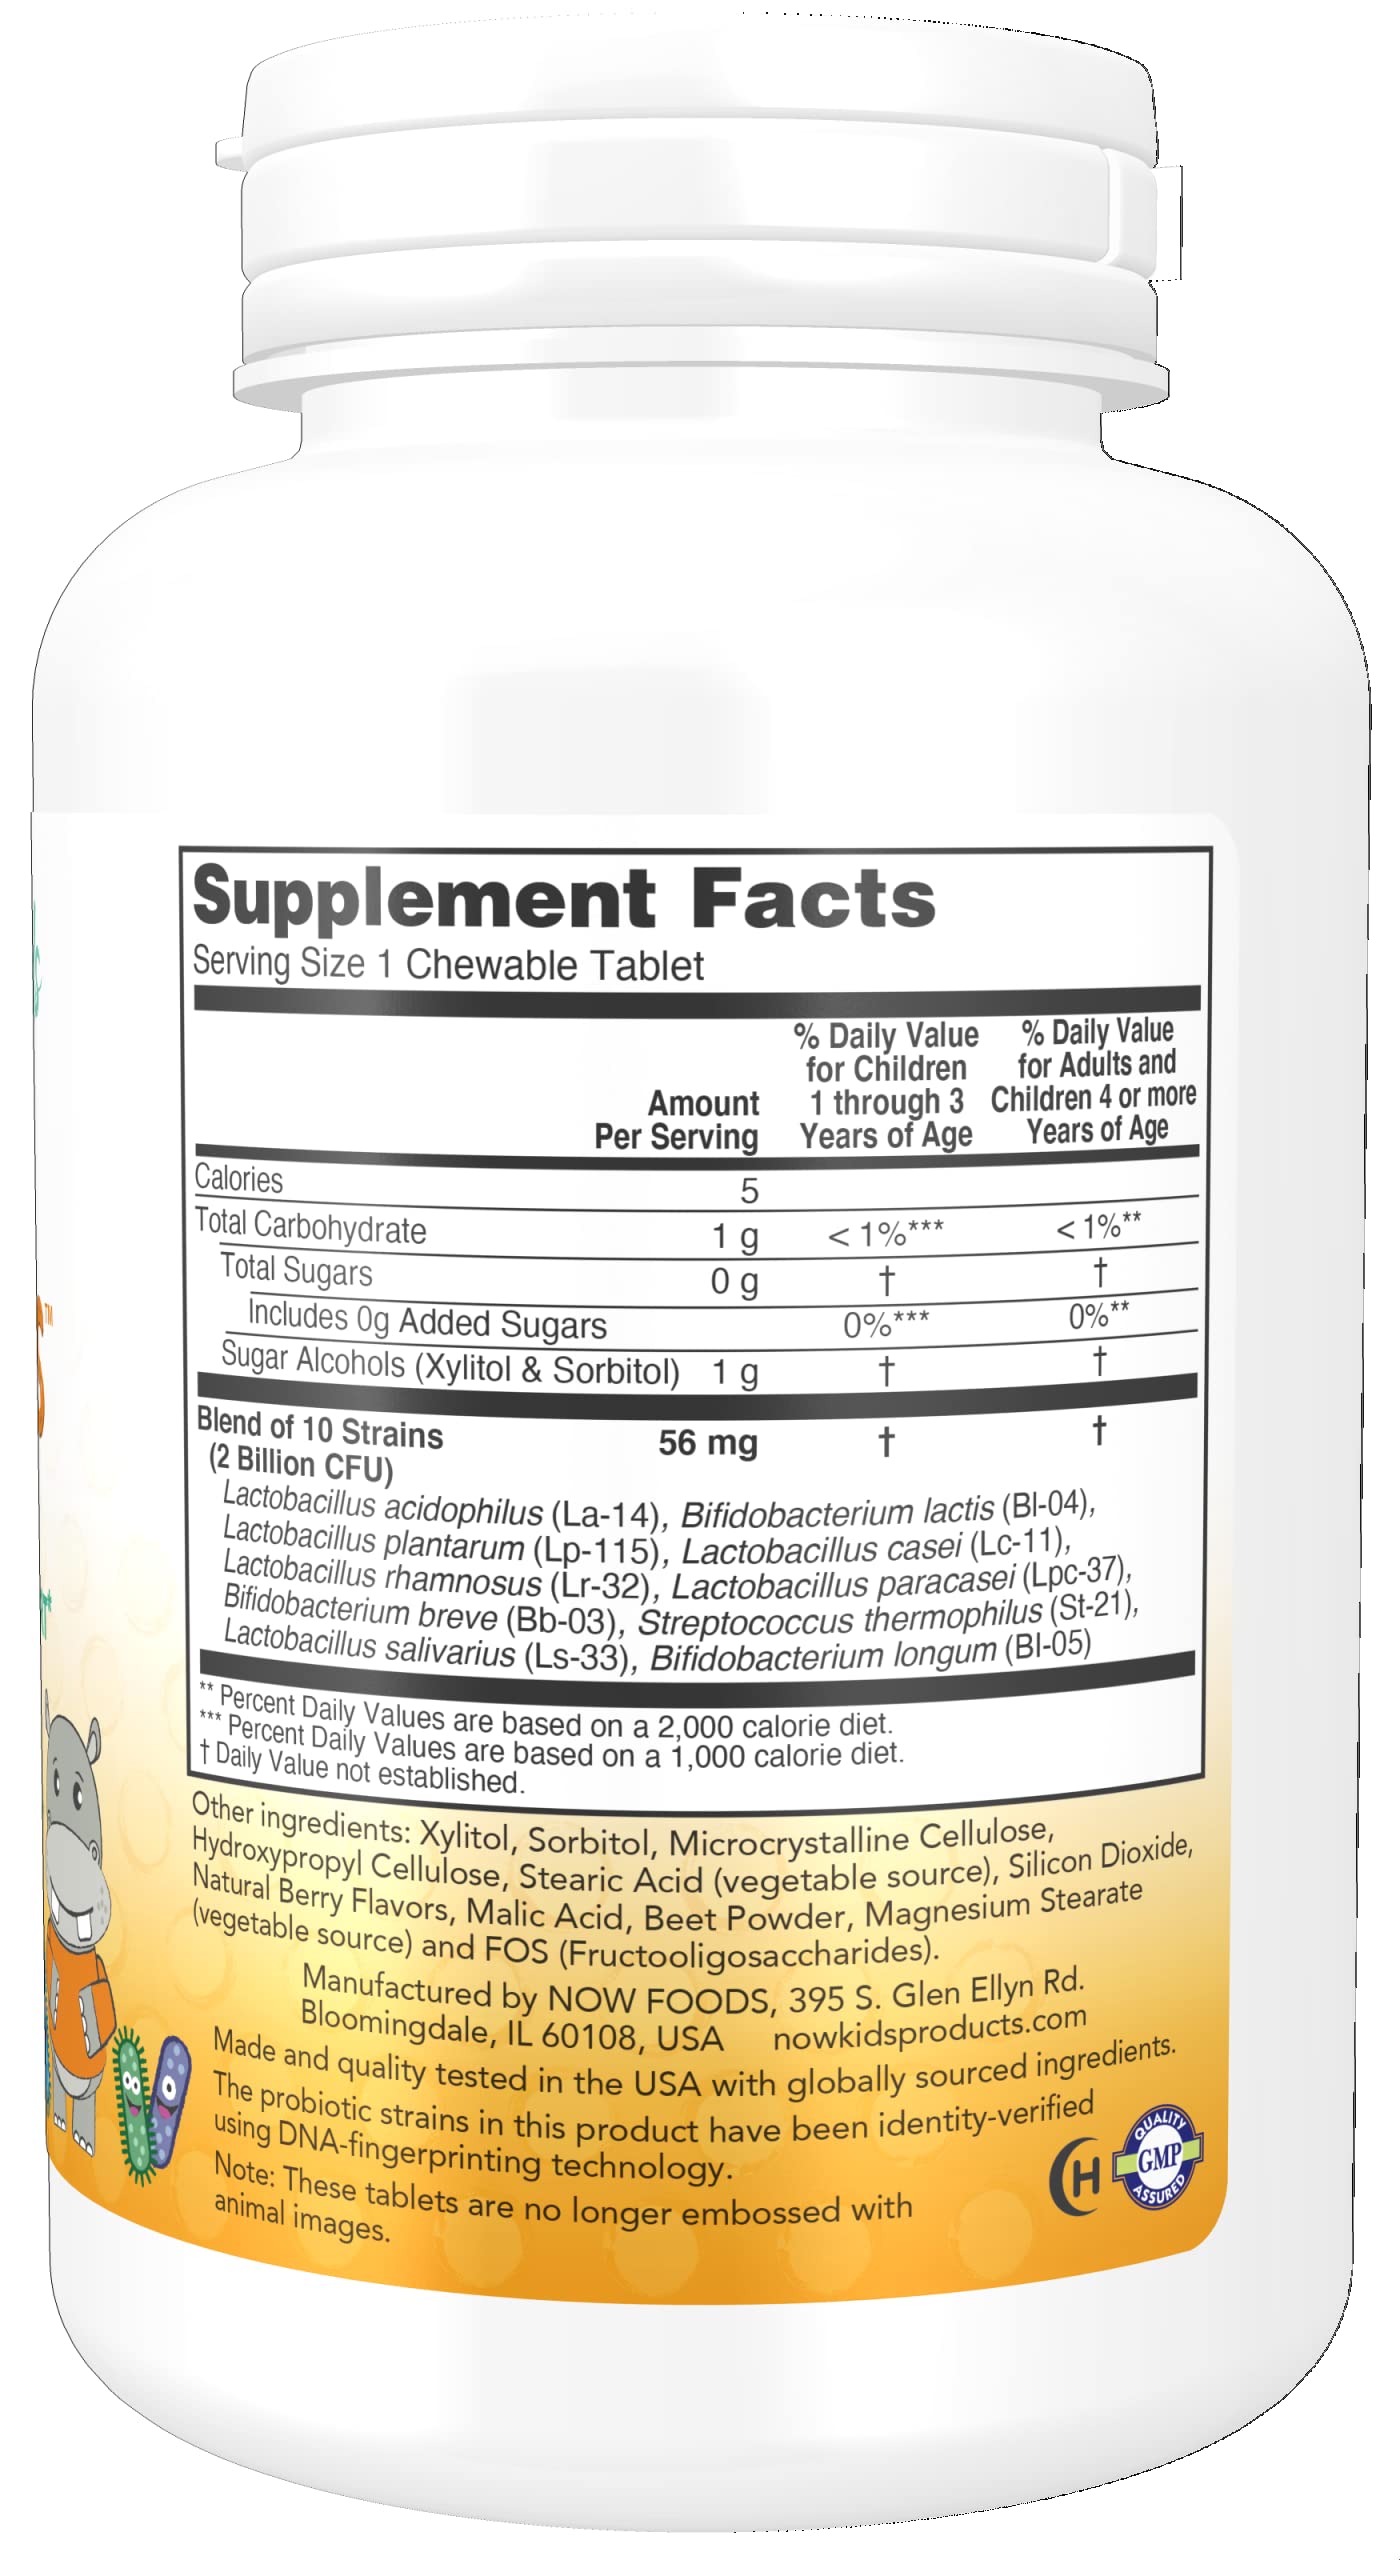 NOW Supplements, BerryDophilus™ with 2 Billion, 10 Probiotic Strains, Xylitol Sweetened, Strain Verified, 120 Chewables, packaging may vary